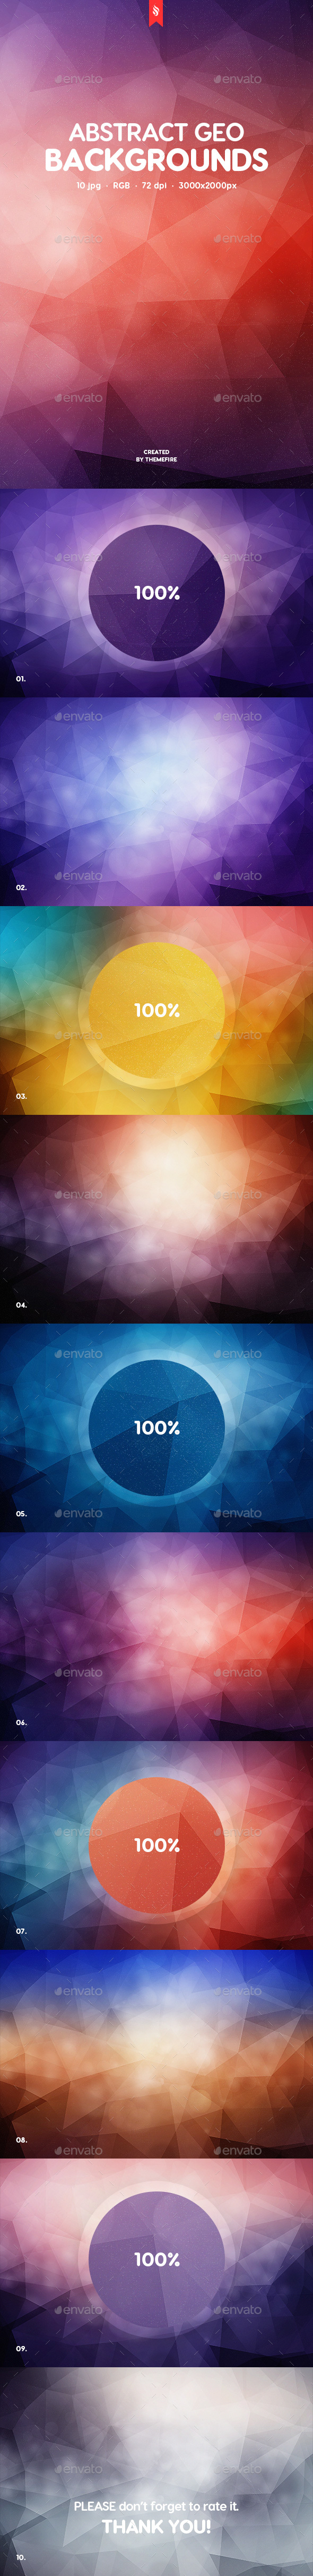 10 Abstract Geo Backgrounds